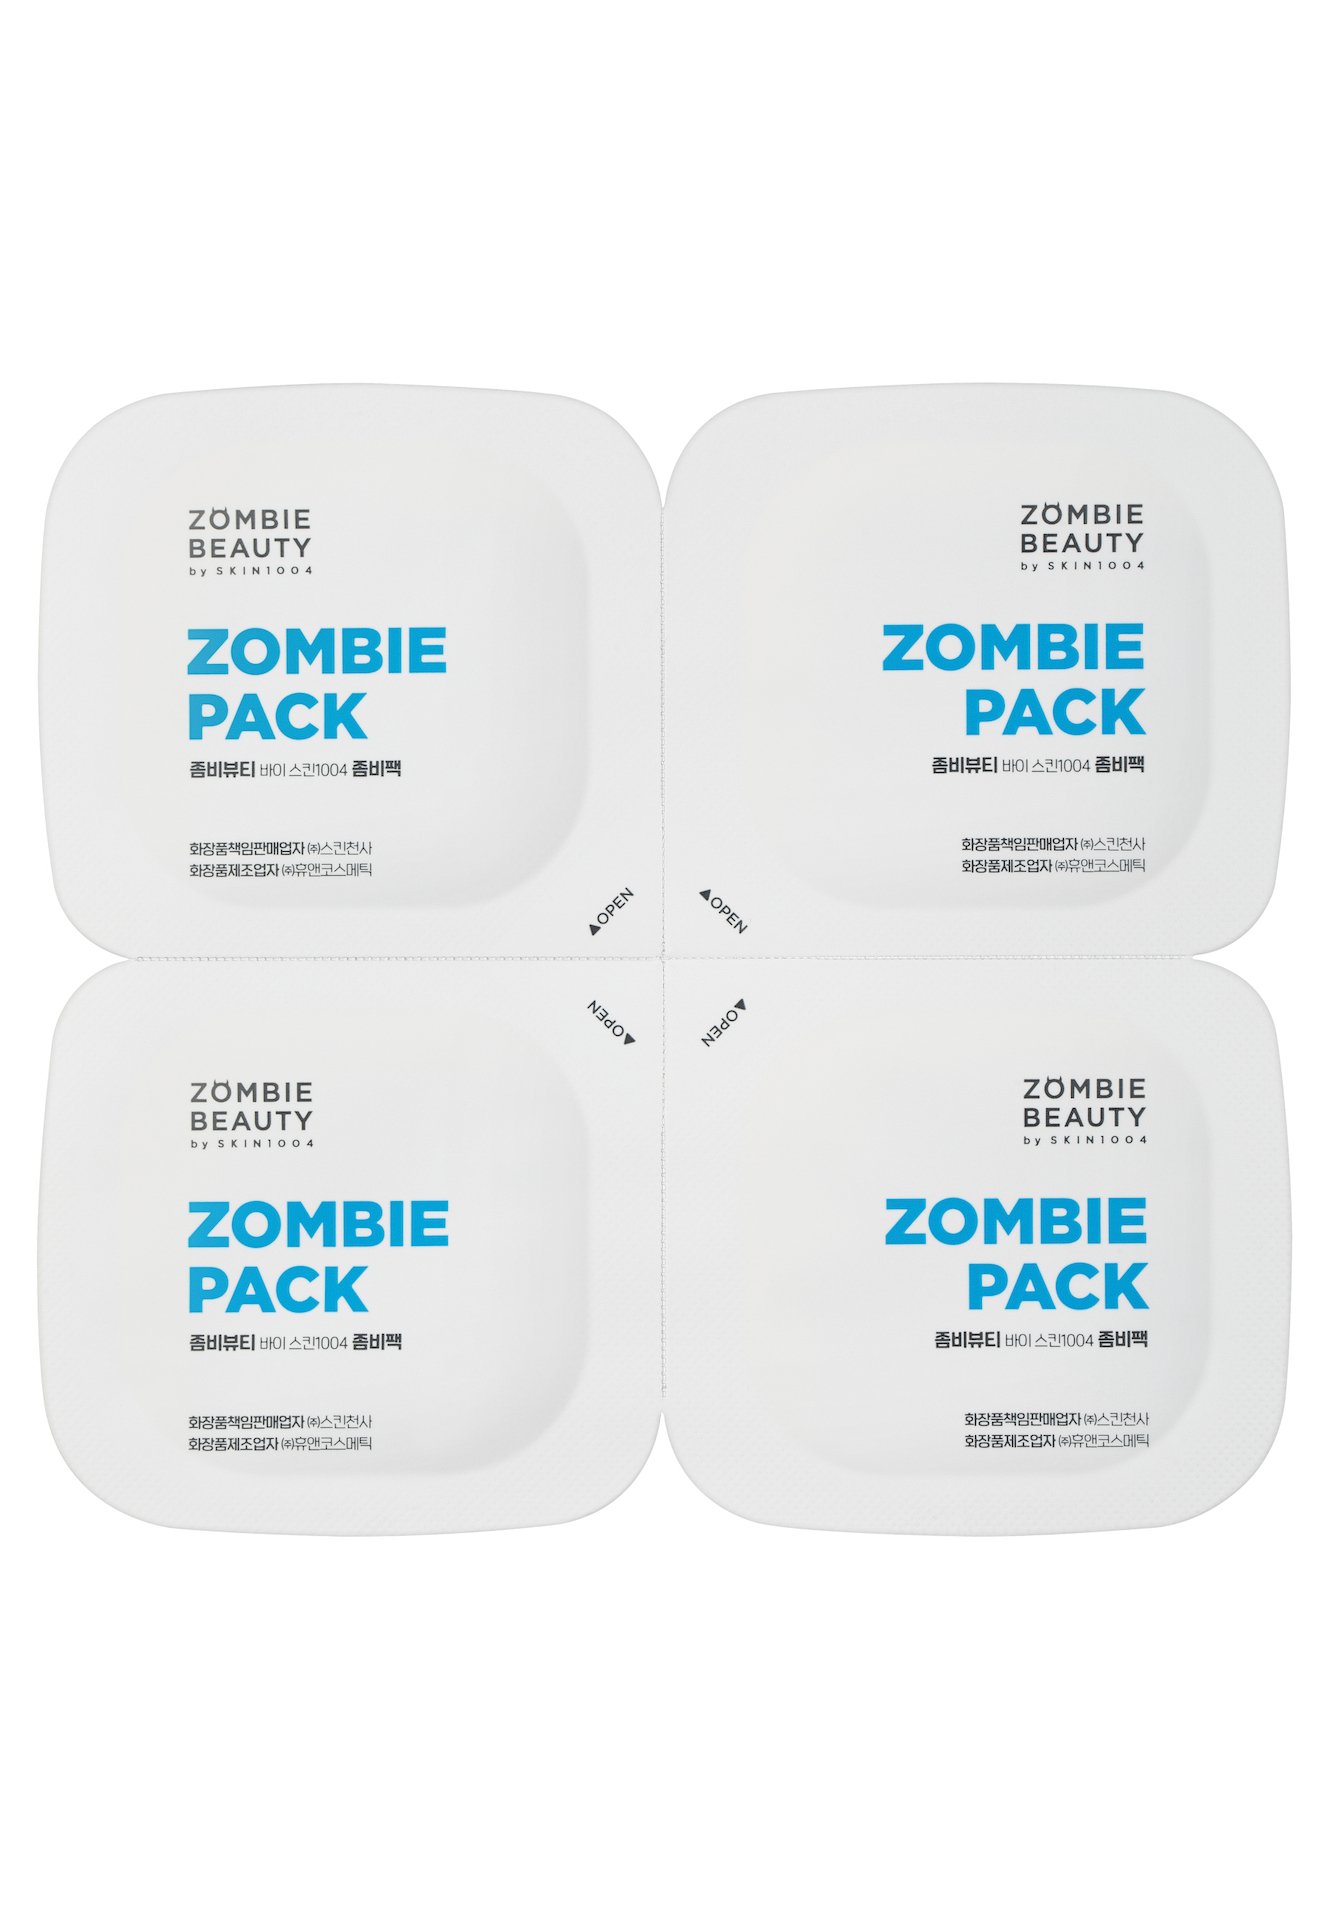 ZOMBIE BEAUTY by SKIN1004 Zombie Pack & Activator Kit